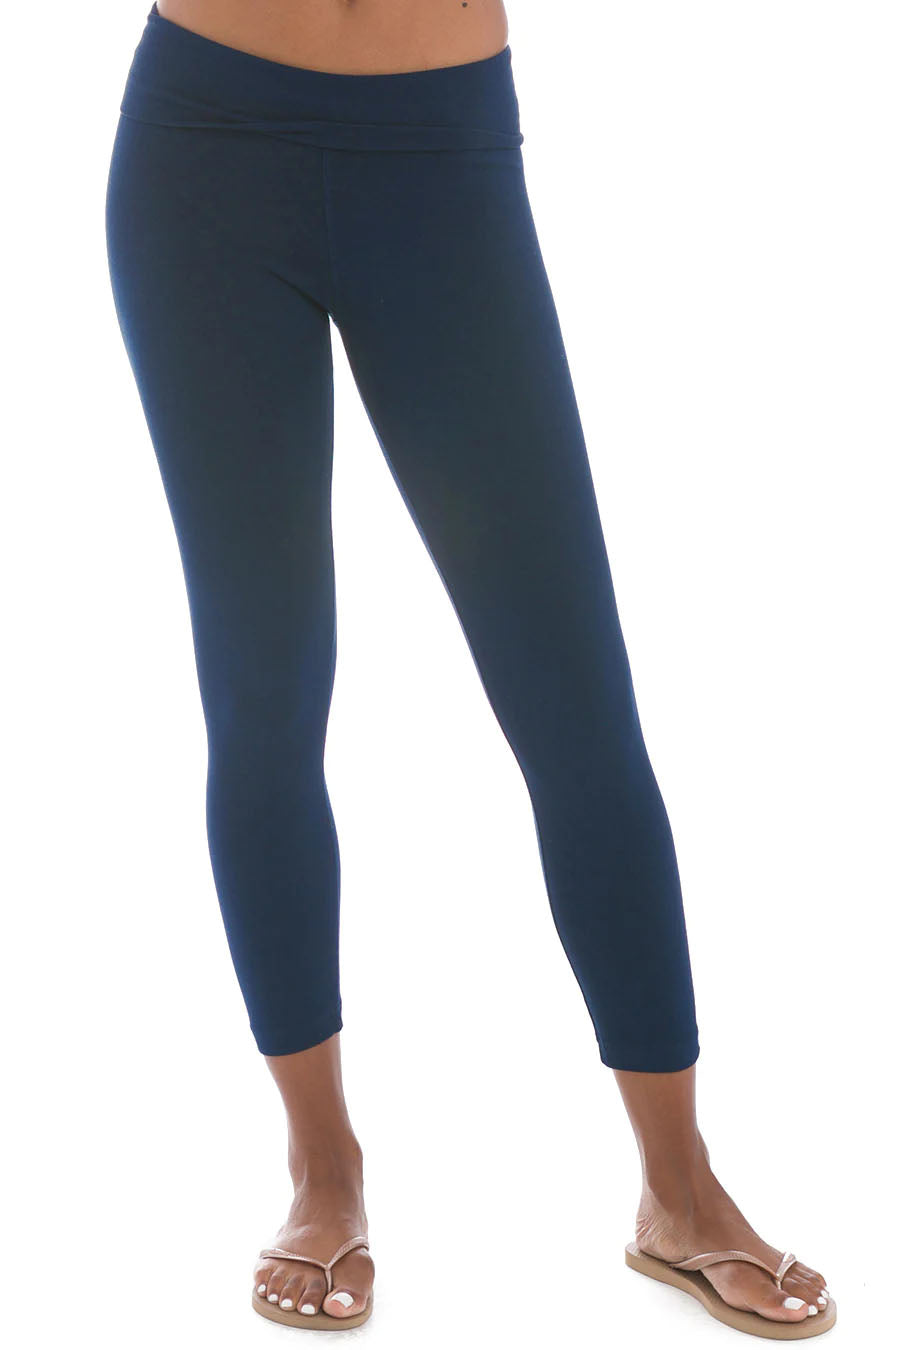 Rolldown Layered Legging (Style 588, Past Midnight) by Hard Tail Forev -  Londo Lifestyle